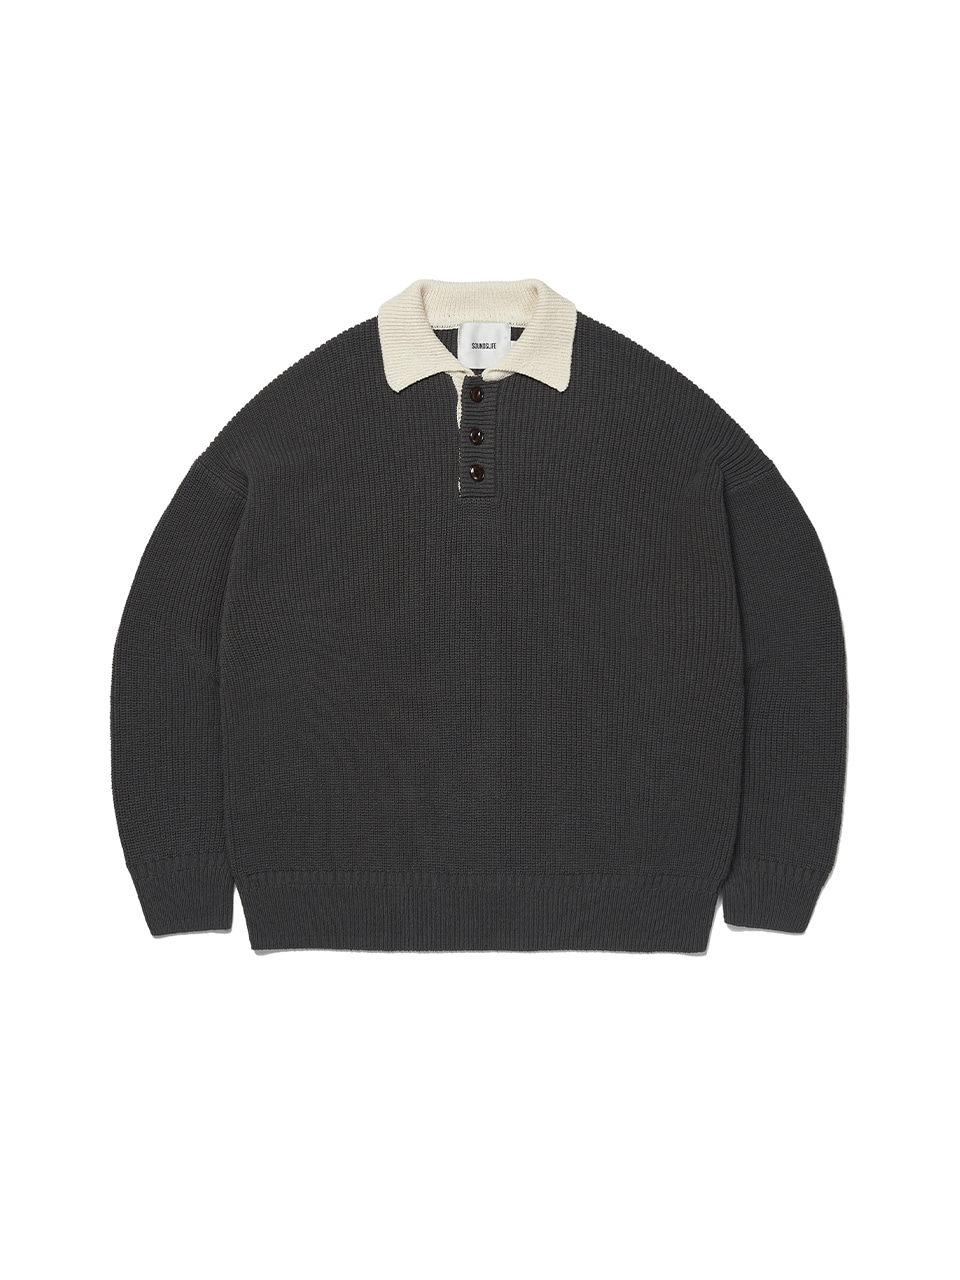 SOUNDSLIFE - Heavy Cotton Rugby Knit Charcoal